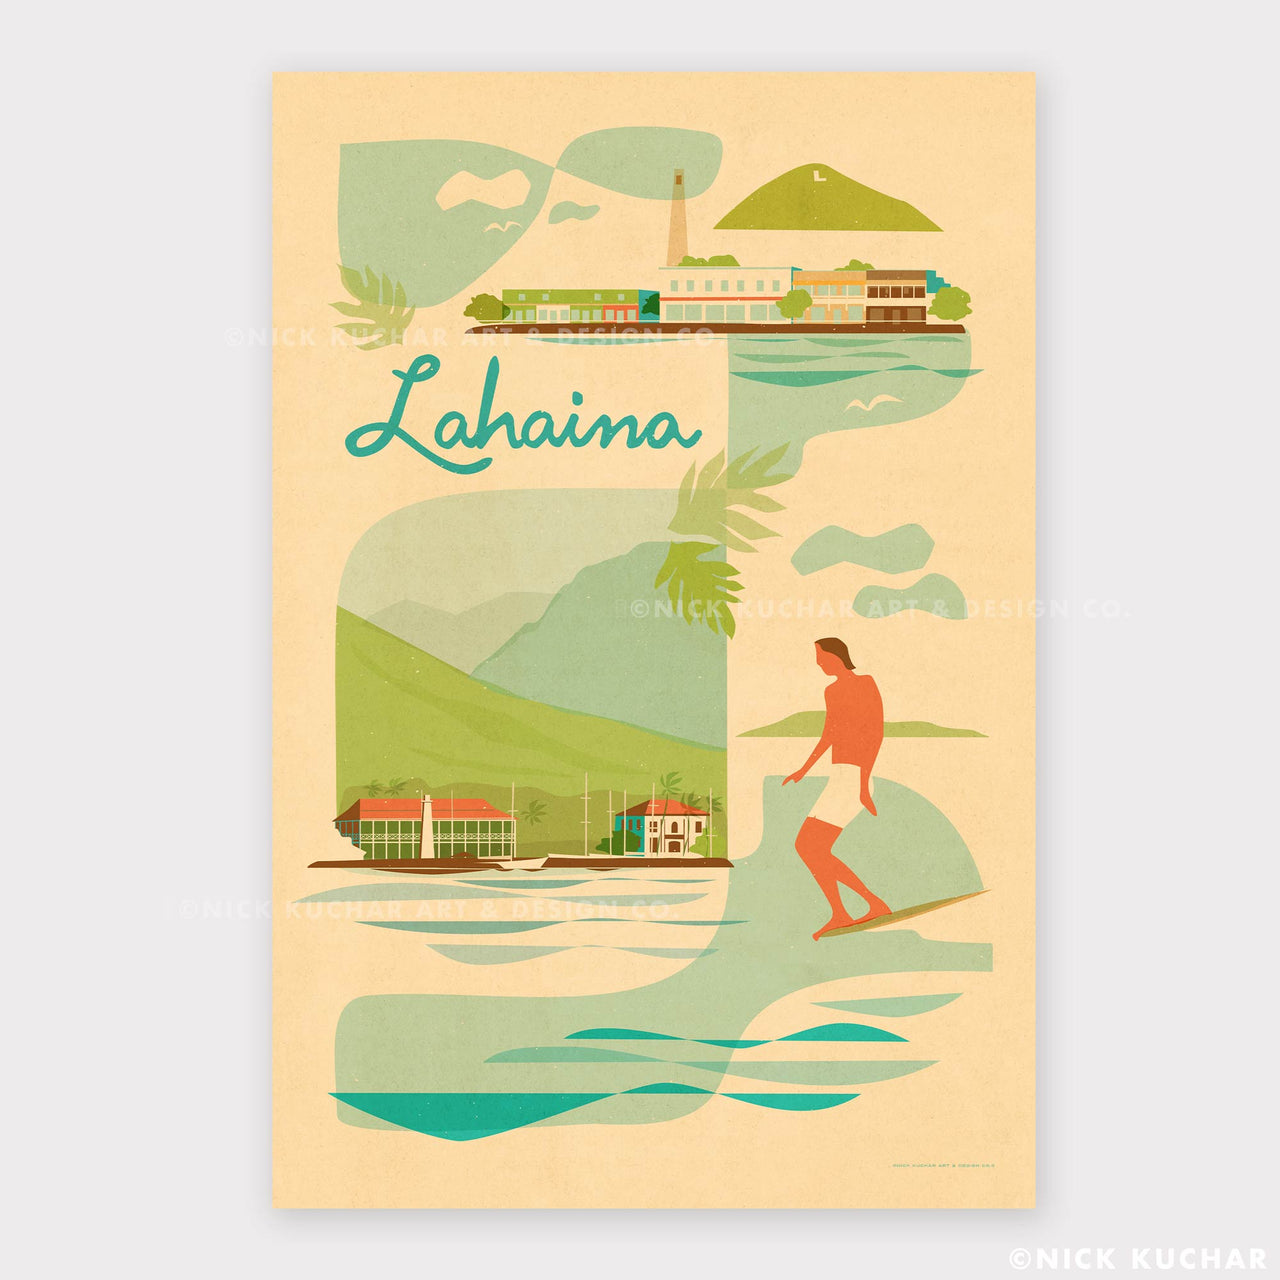 Lahaina Maui Print featuring Front Street, surfing and pioneer inn